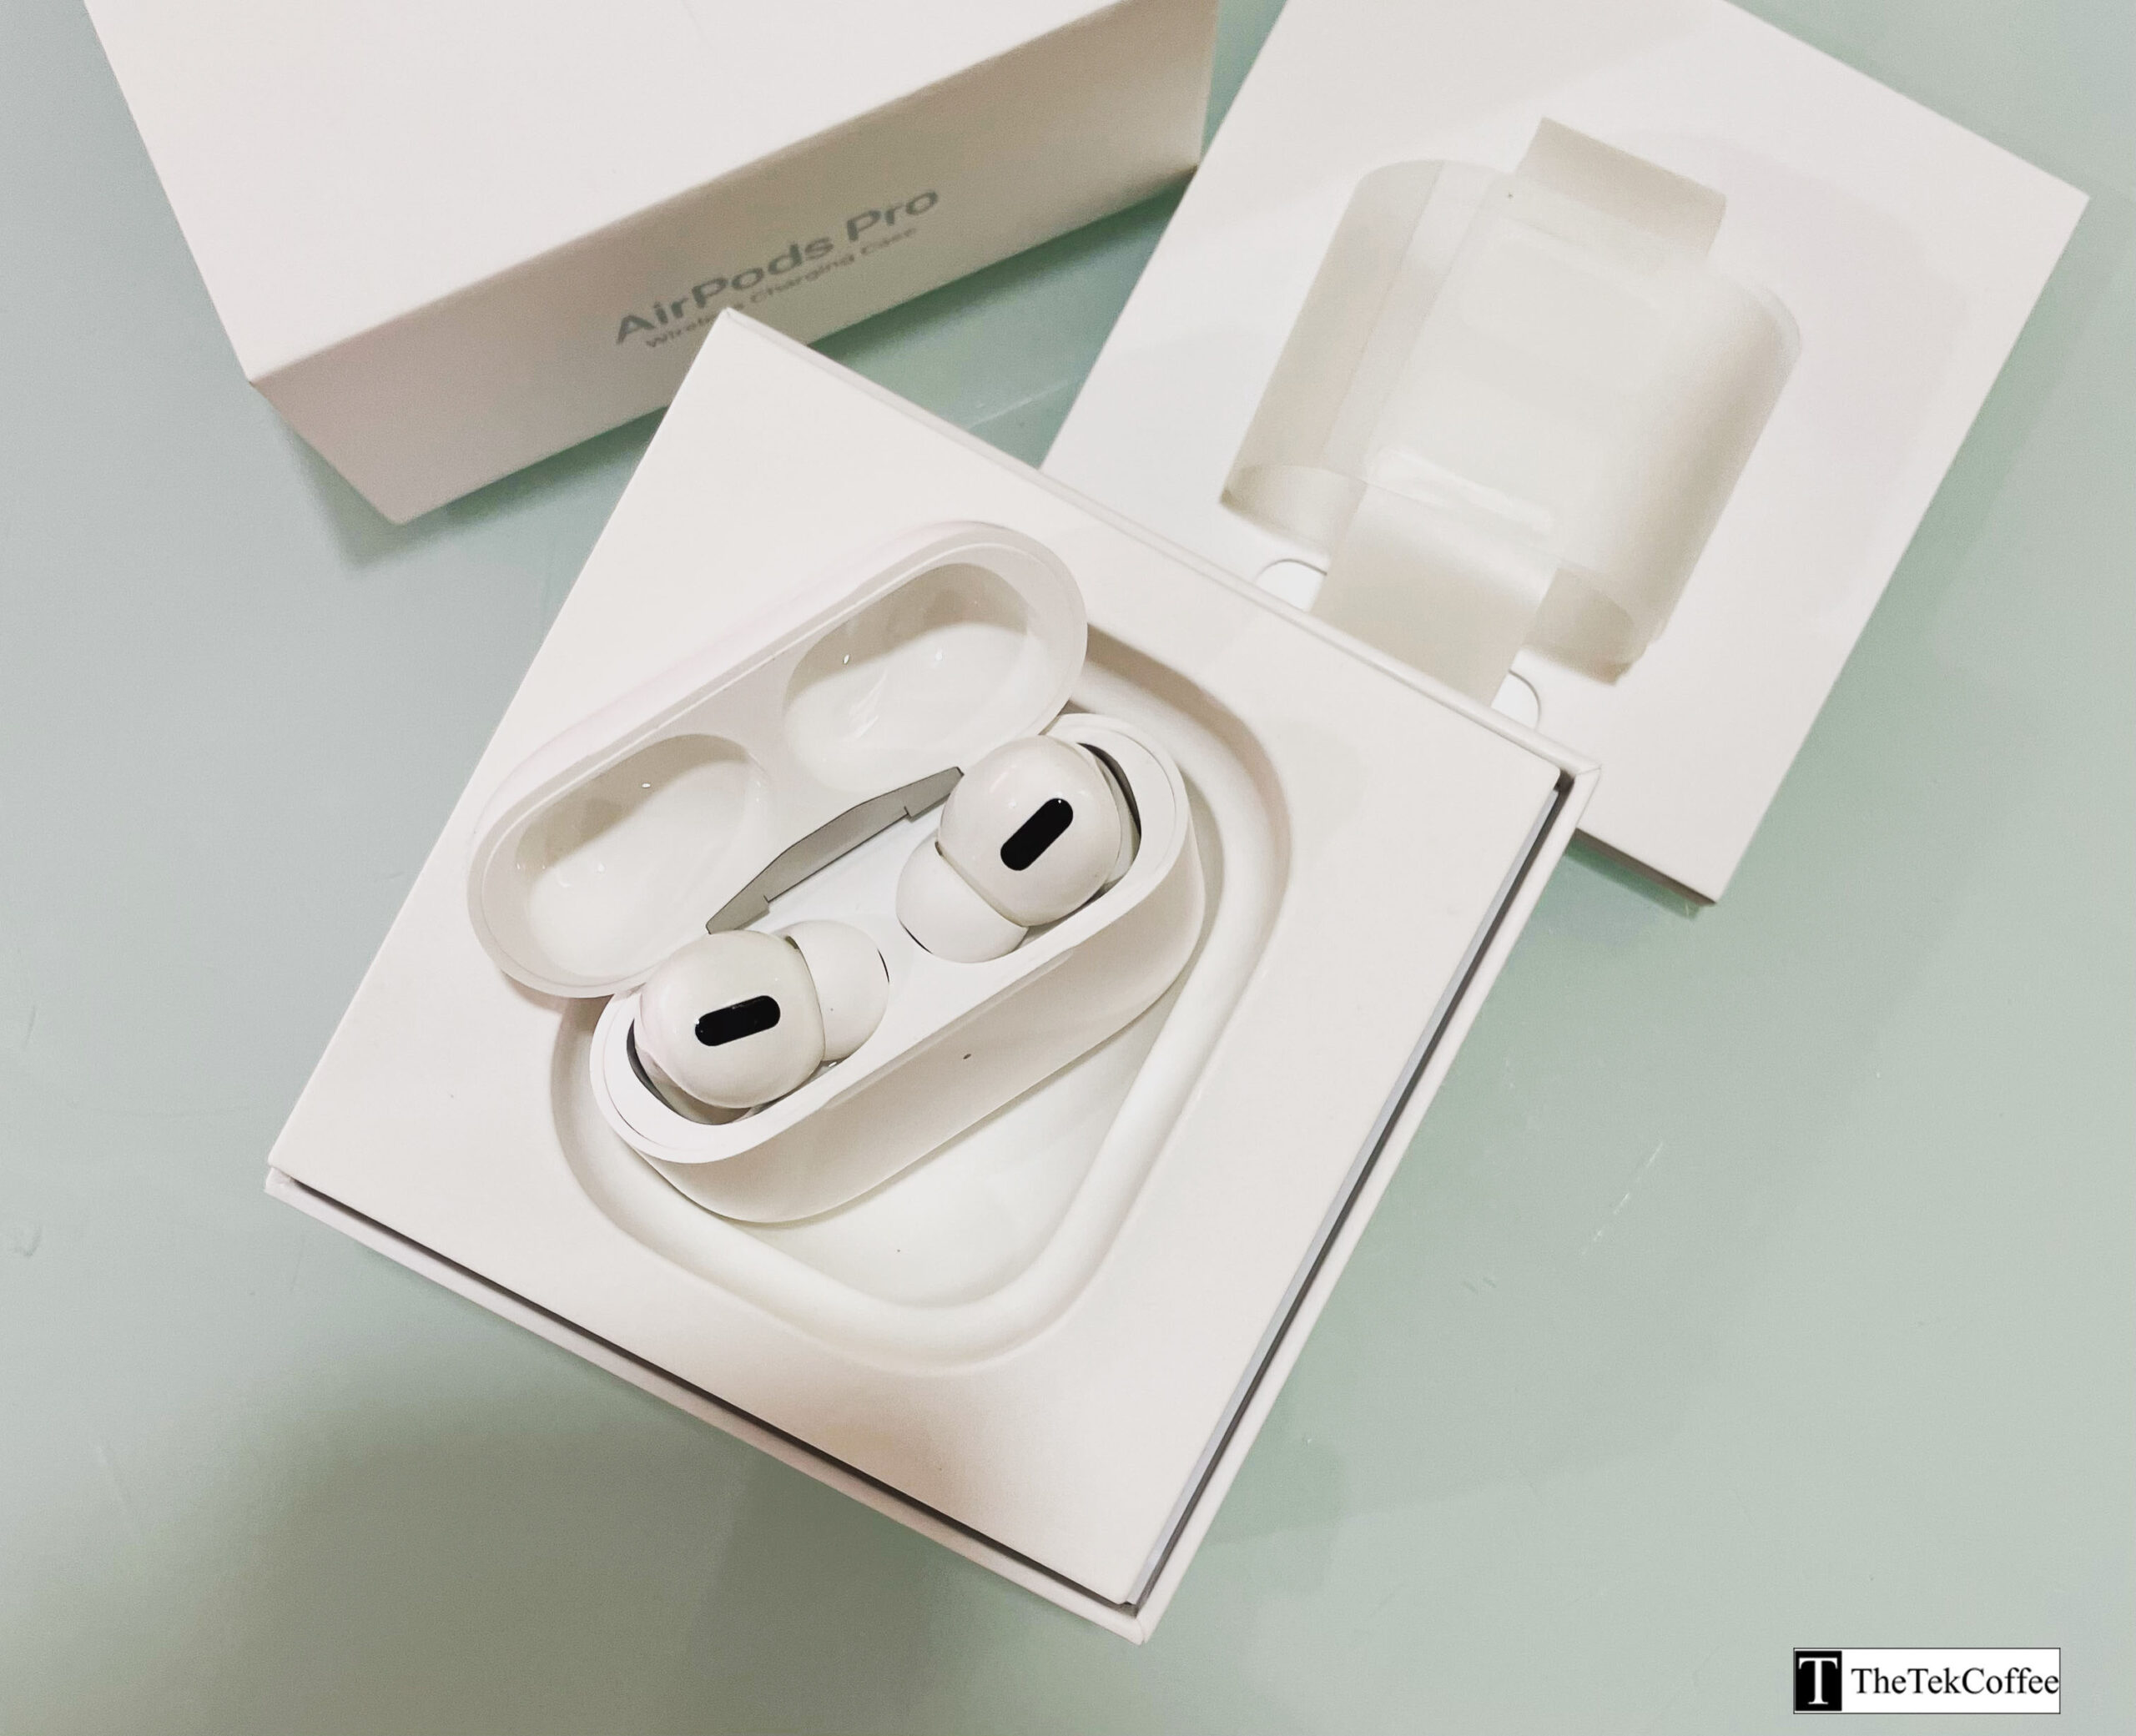 AirPods Pro - MWP22AM/A